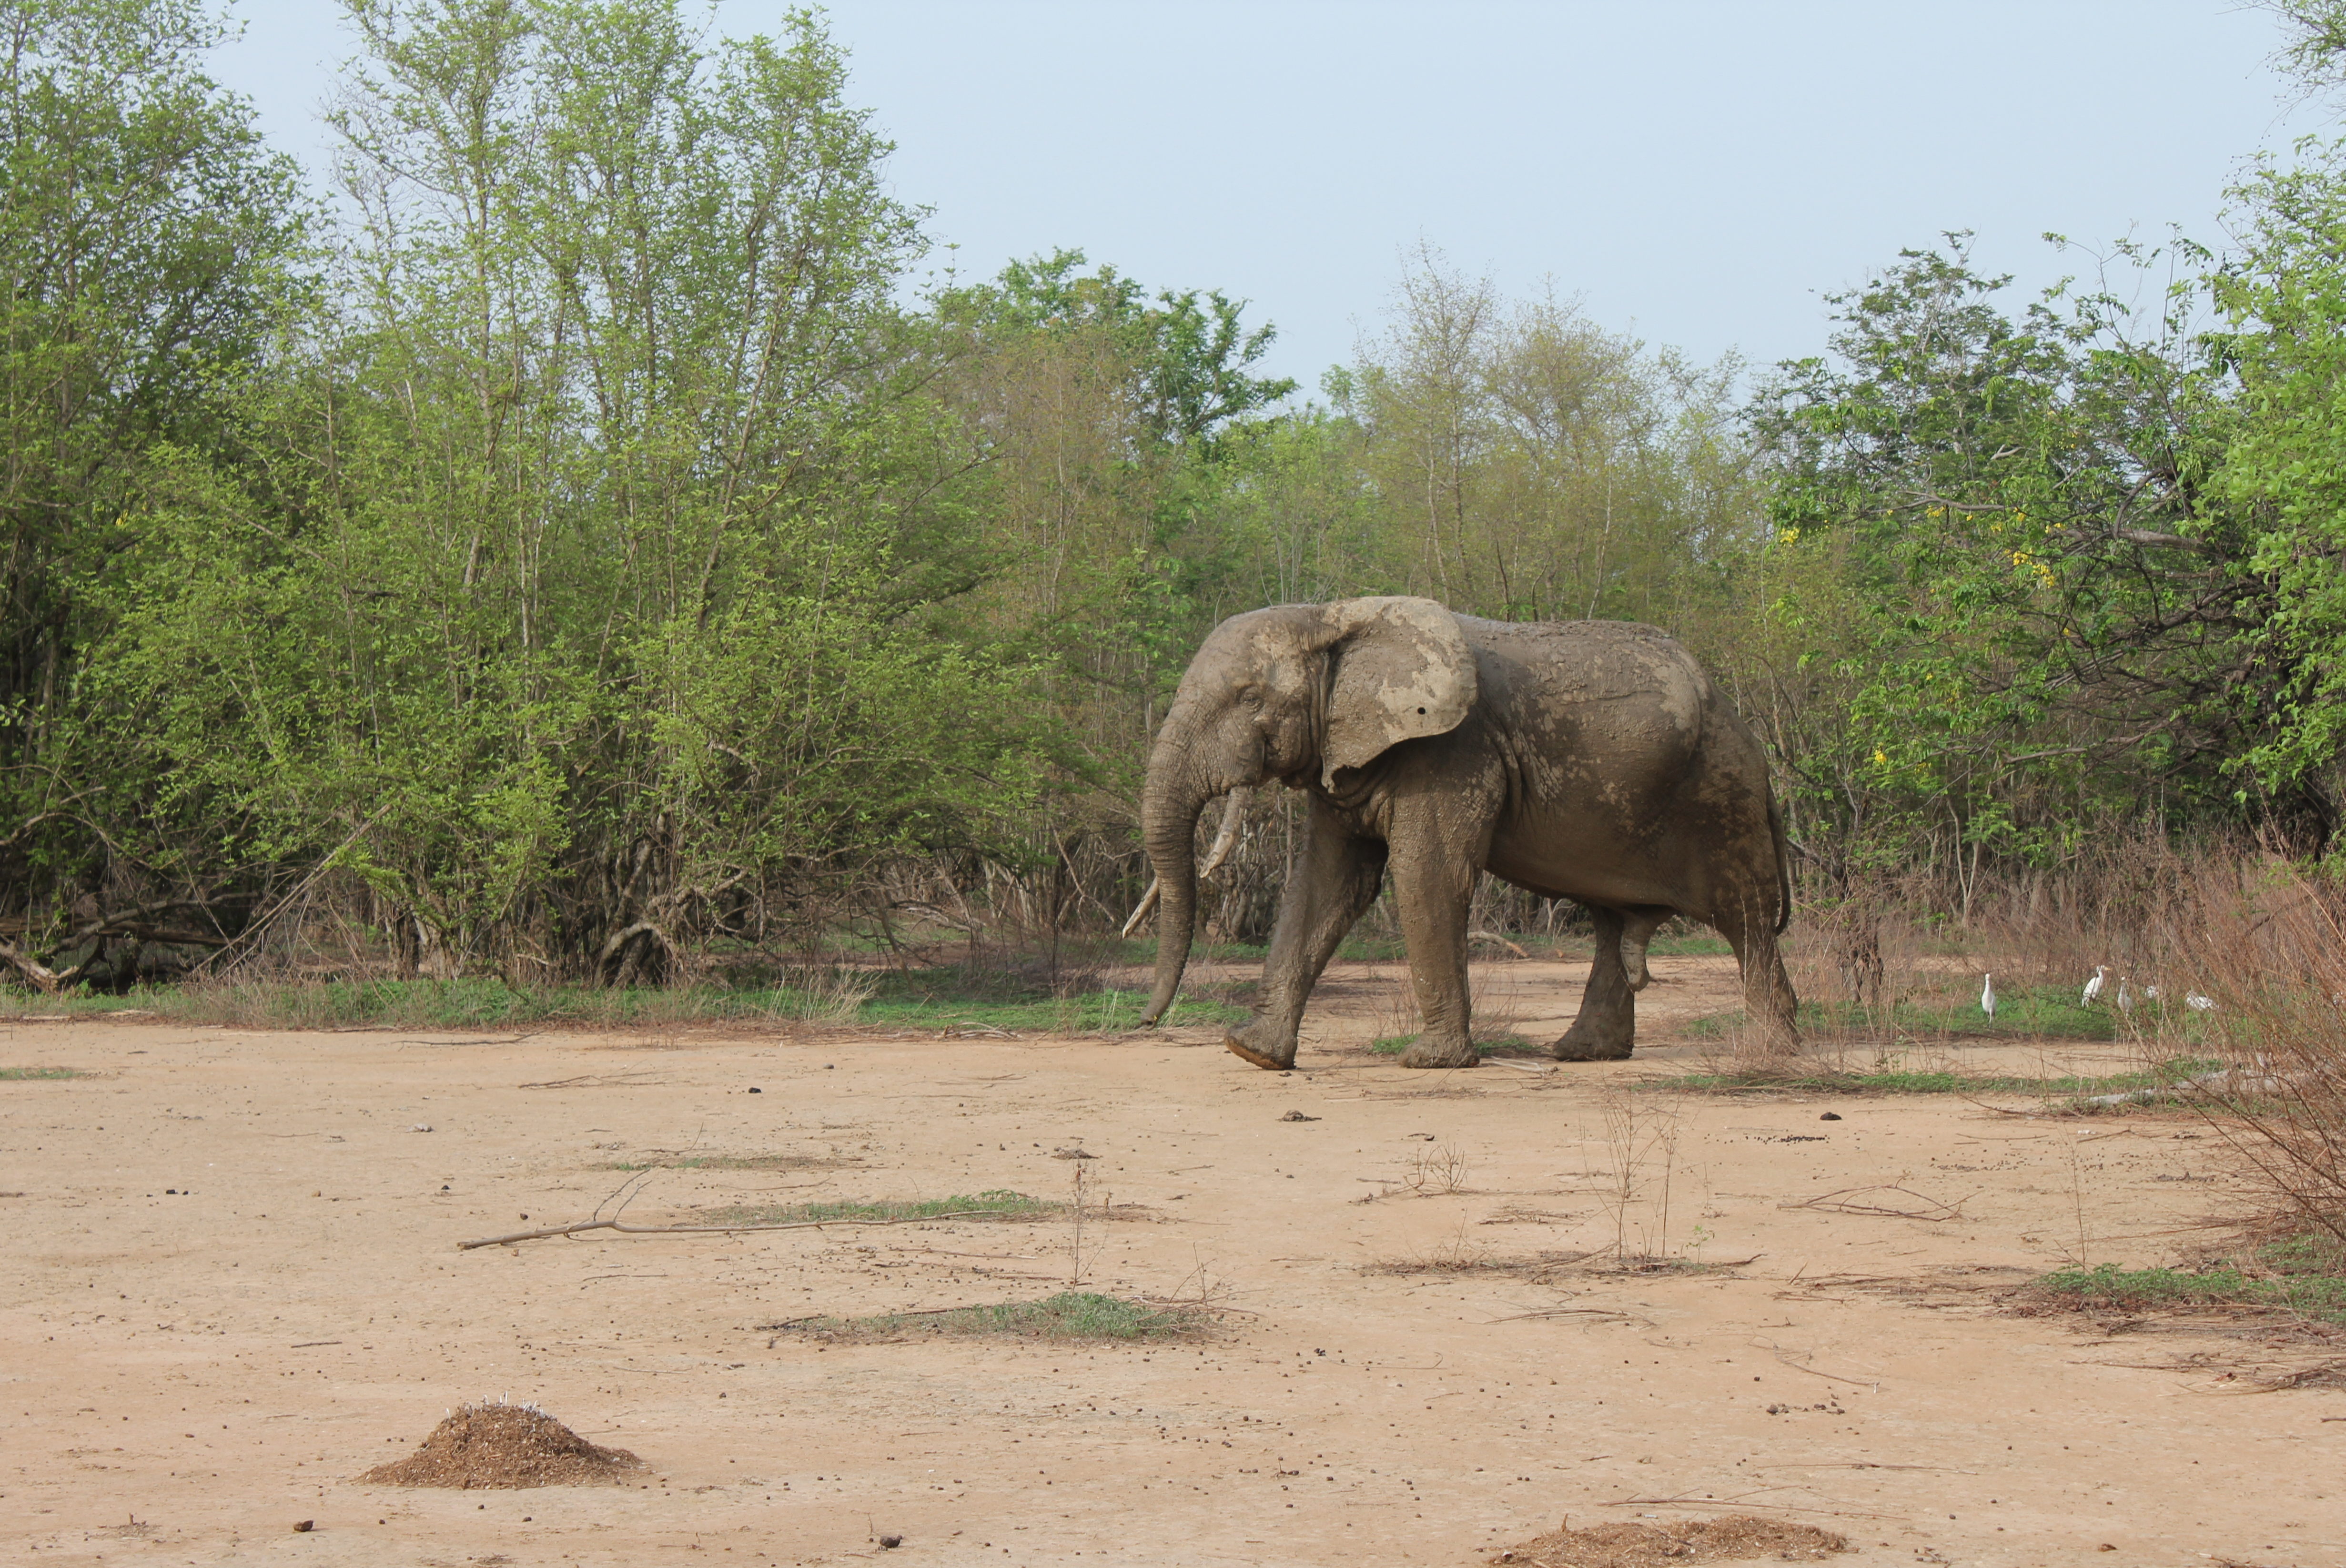 A lone elephant stands by the roadside. On safari in Mole National Park, Ghana